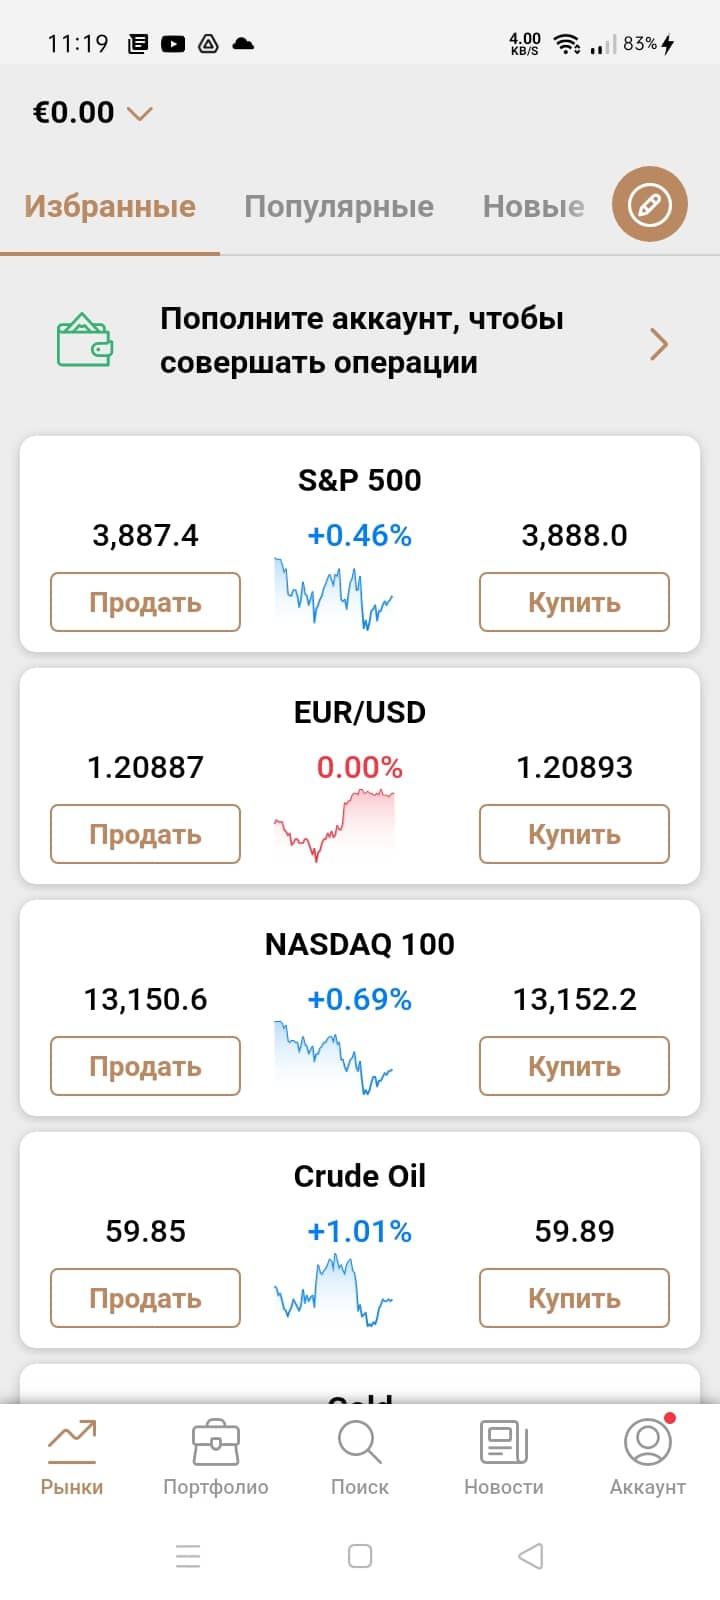 The best platforms for trading in the European stock market